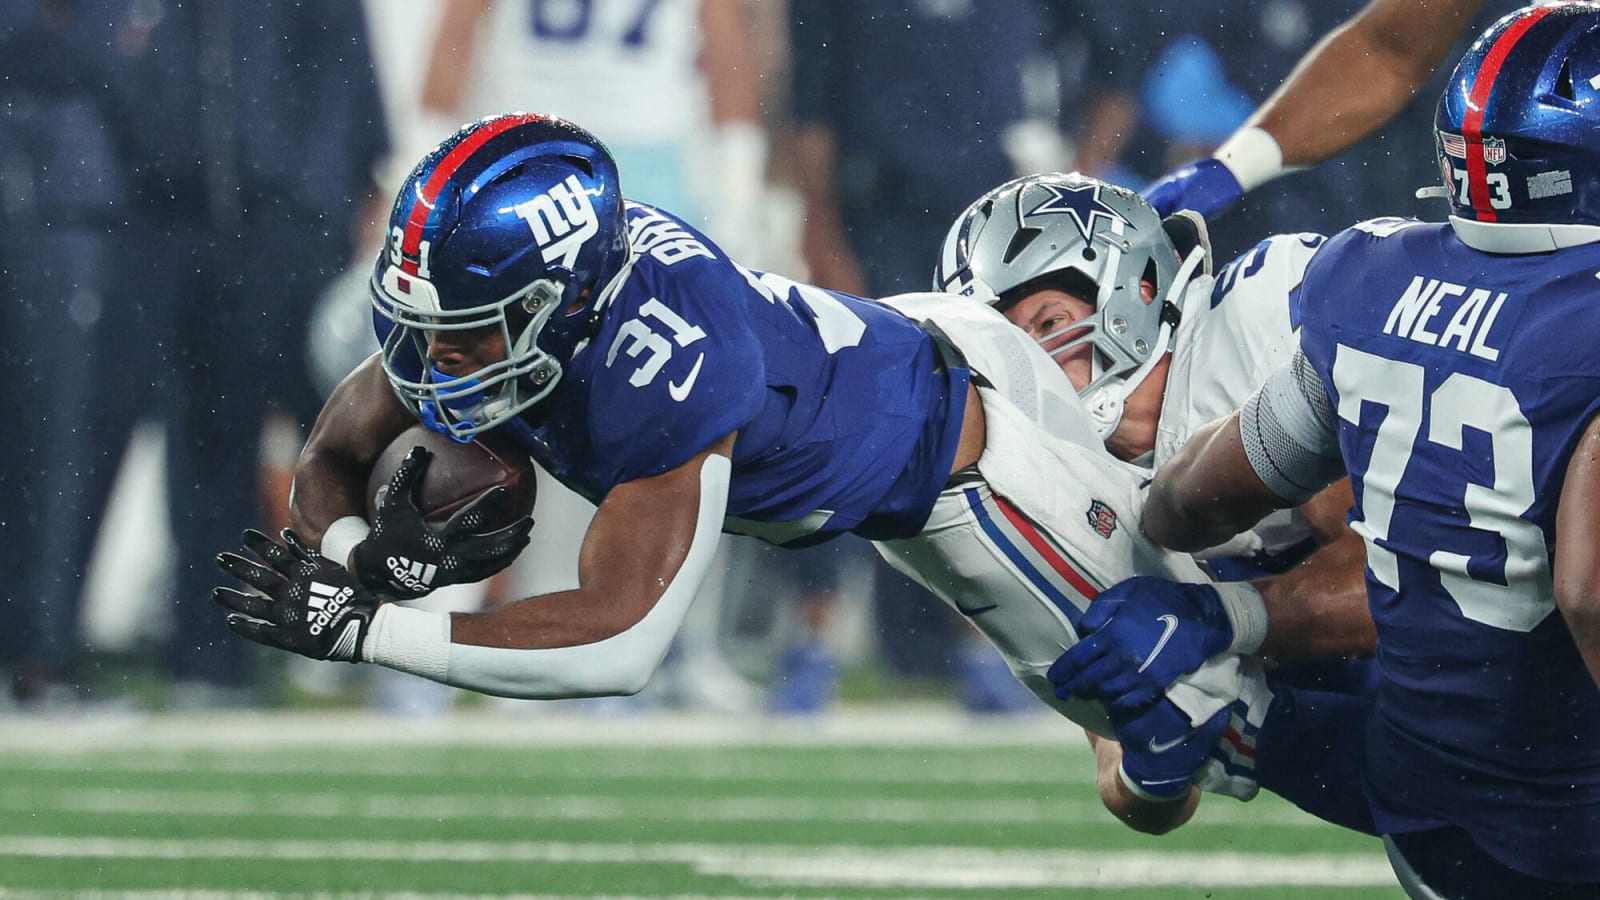 NFL &#39;MNF&#39; Week 4: Best bets and preview for Giants vs. Seahawks